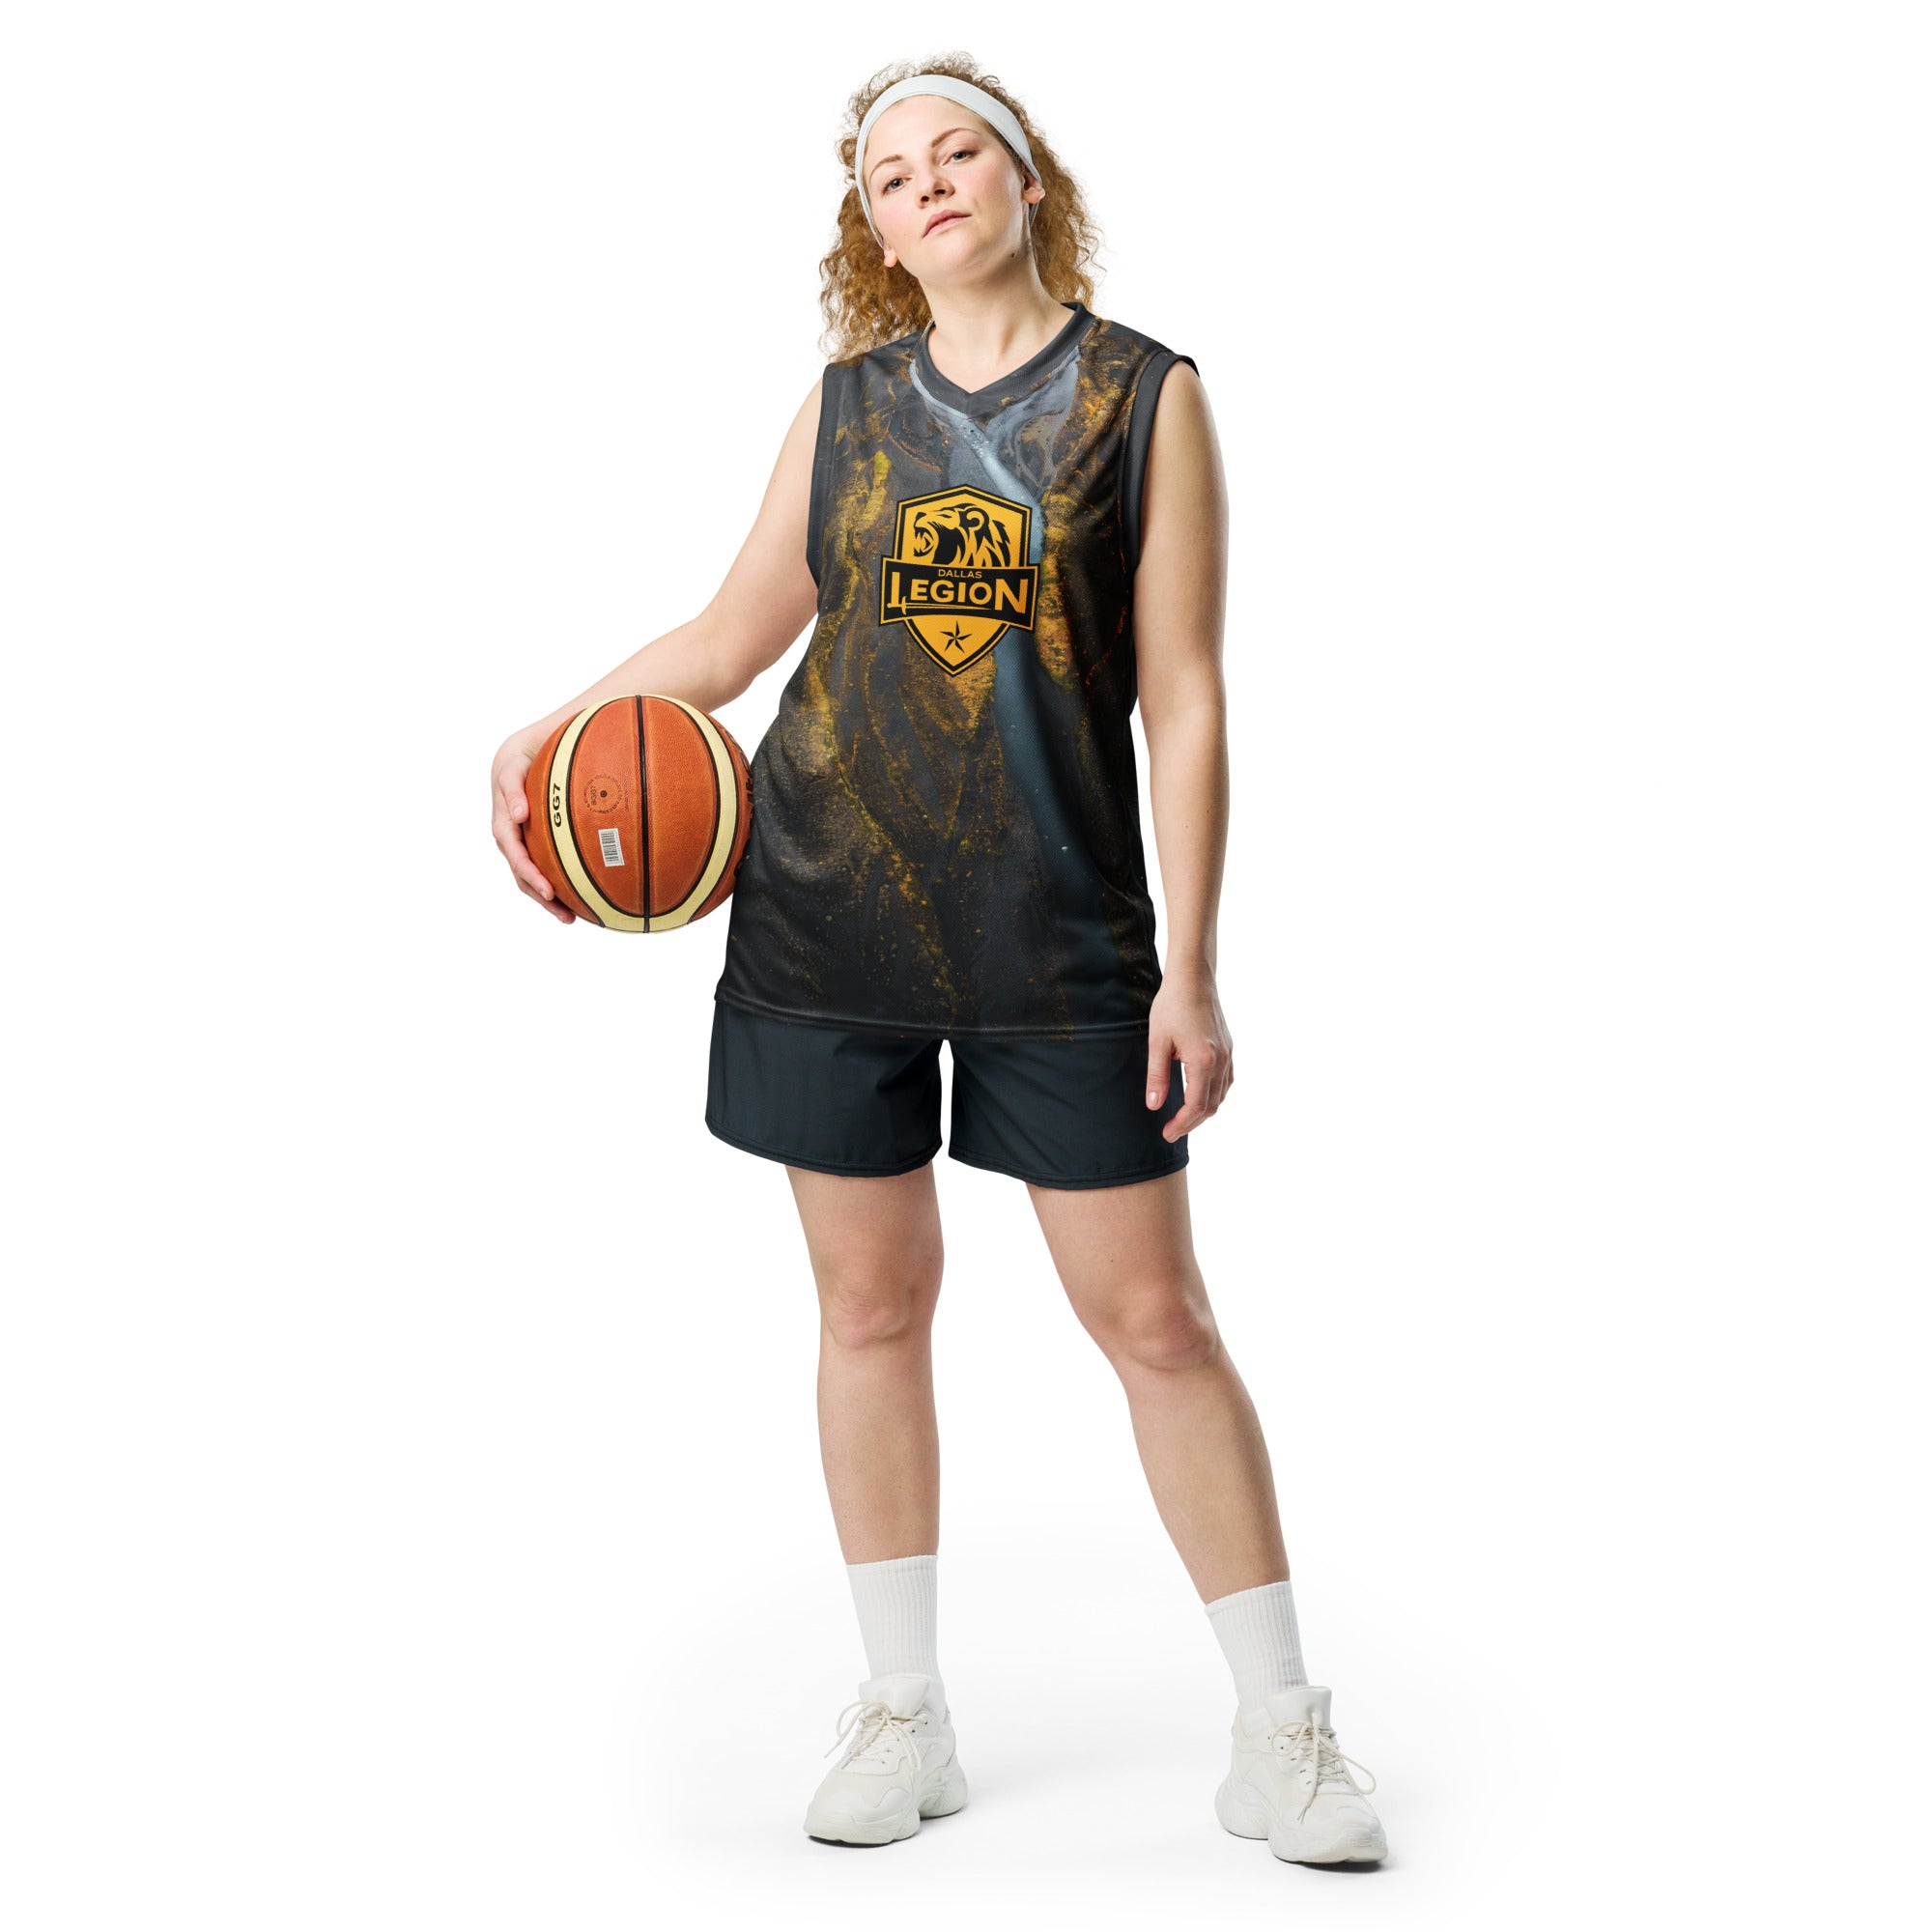 Recycled unisex basketball jersey - Star River